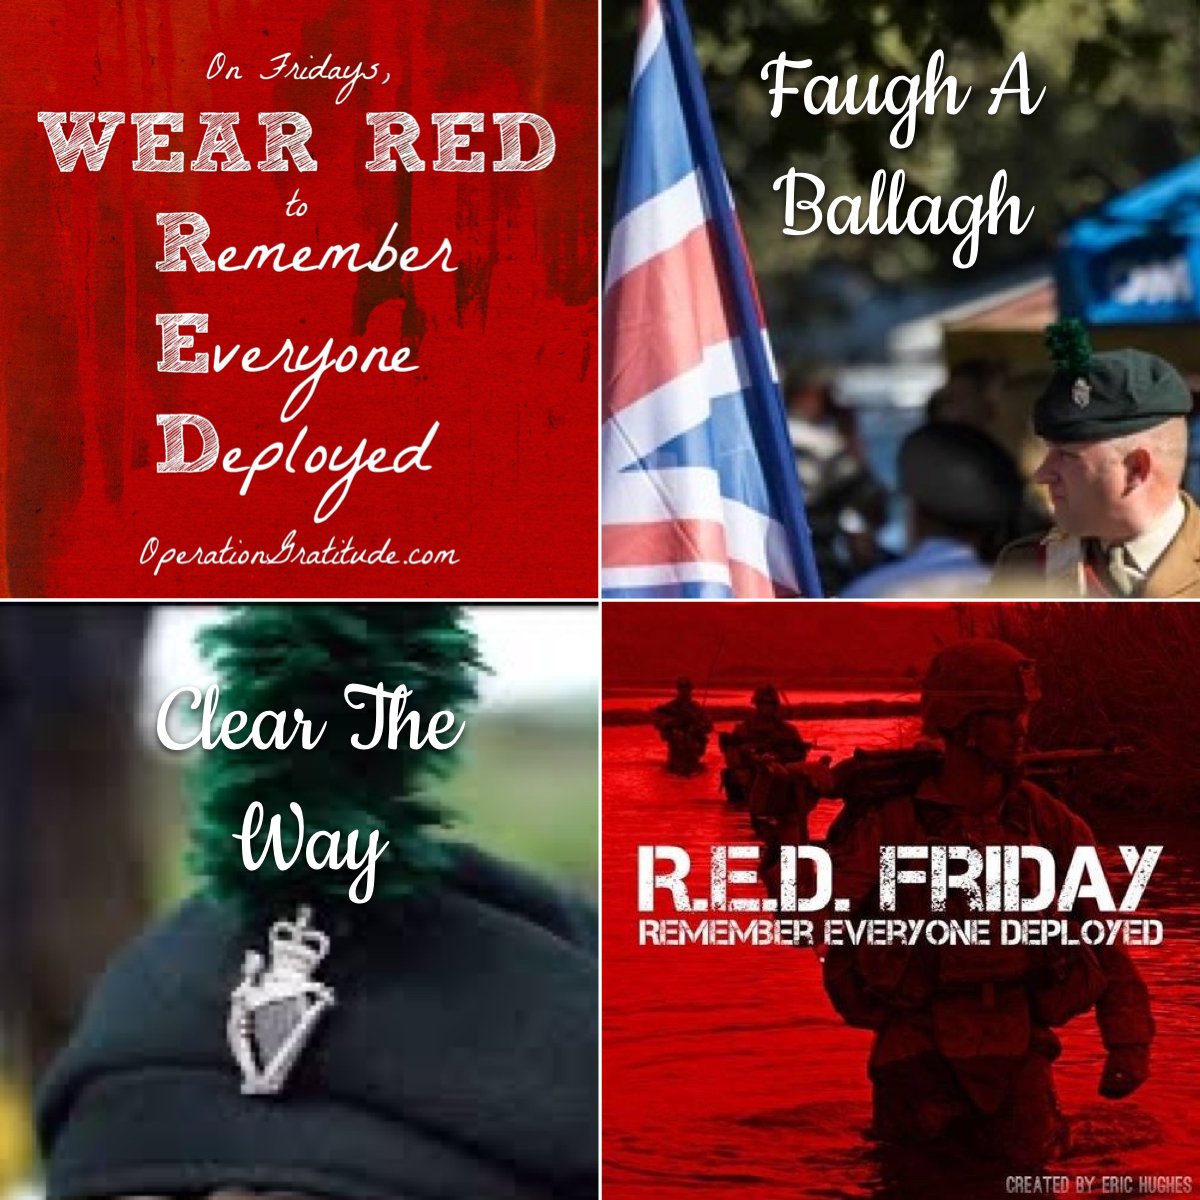 🚂135 RED FRIDAY
@4jax2
@1be3z
@AngusY100
@x4eileen
@7XSoldier
@Tiger_Mom19
@VEtFeMaLE
@1NJConservative
@NavyVeteranMAL2
@GBooth74
@ghost_wales
@giftcee
@GillJames54
@gilly3536
@GregJ1966
@GrumpyUK
@emmya99
@Zegdie
@badlady59 
@tex_djt
@susanusa29
@BCM_SOLT
@TwinBus
@FABPVRIF